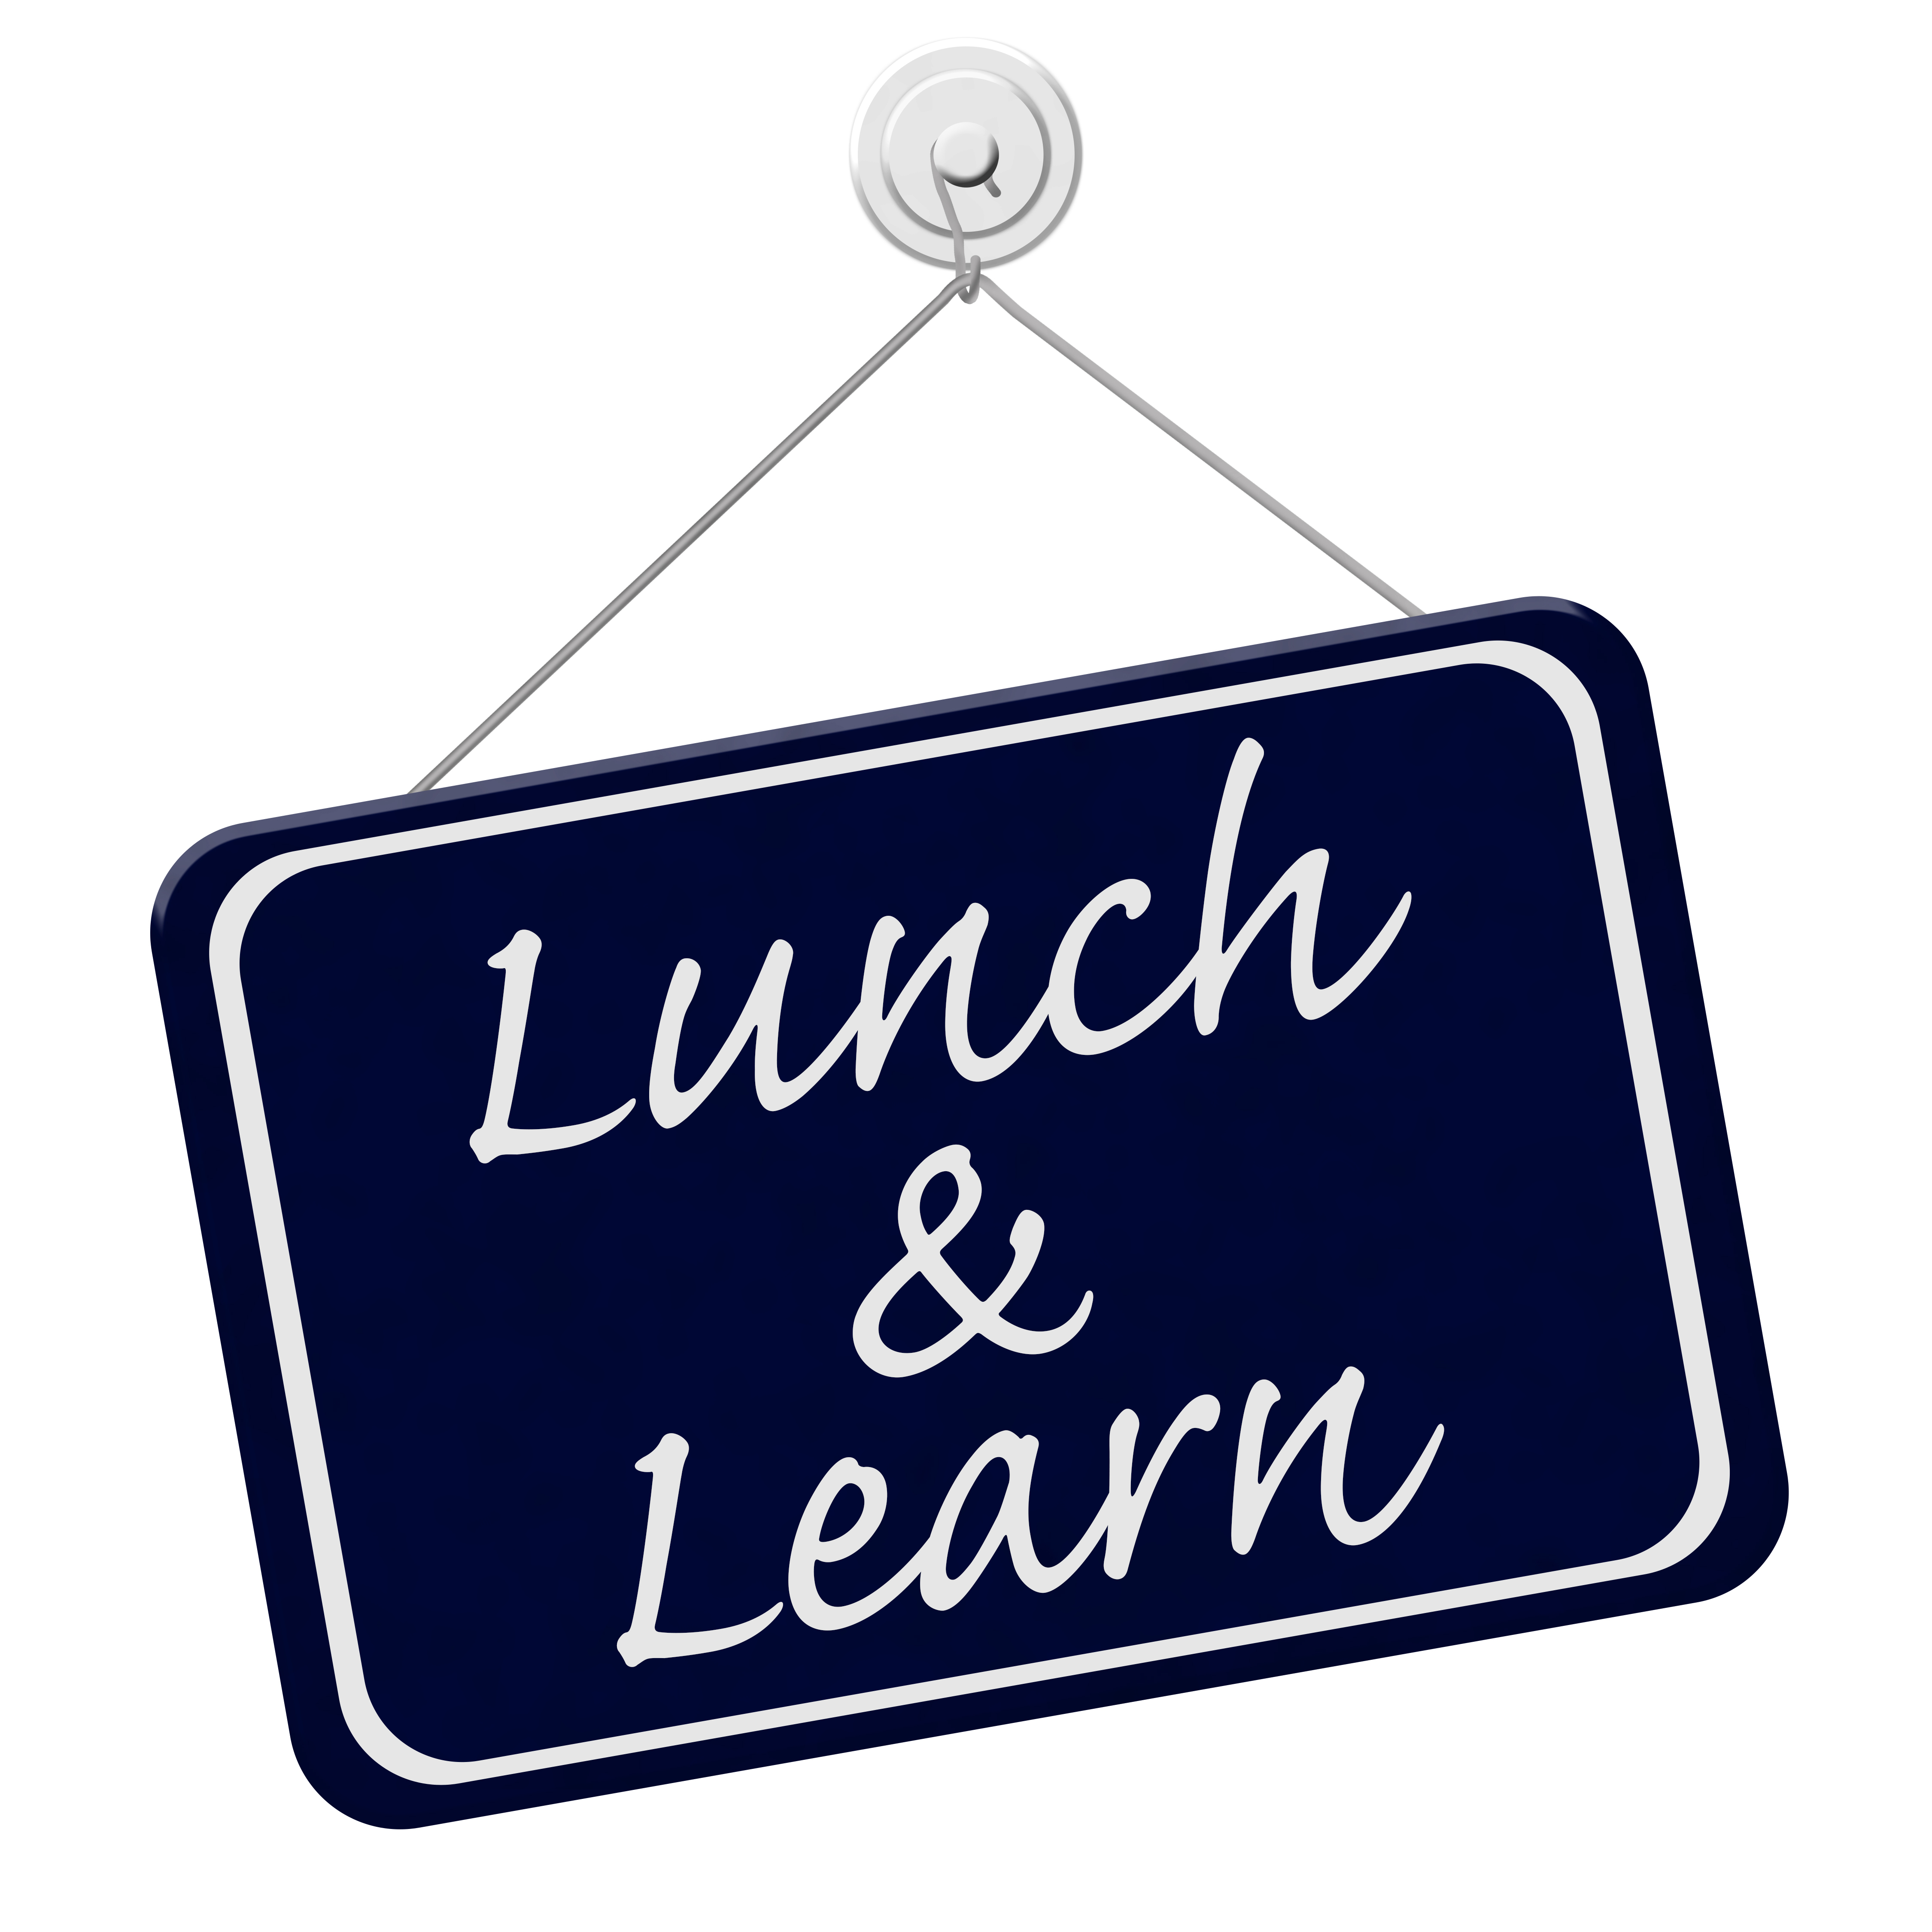 Слово ланч. Lunch and learn. Learn sign. Learn signed.